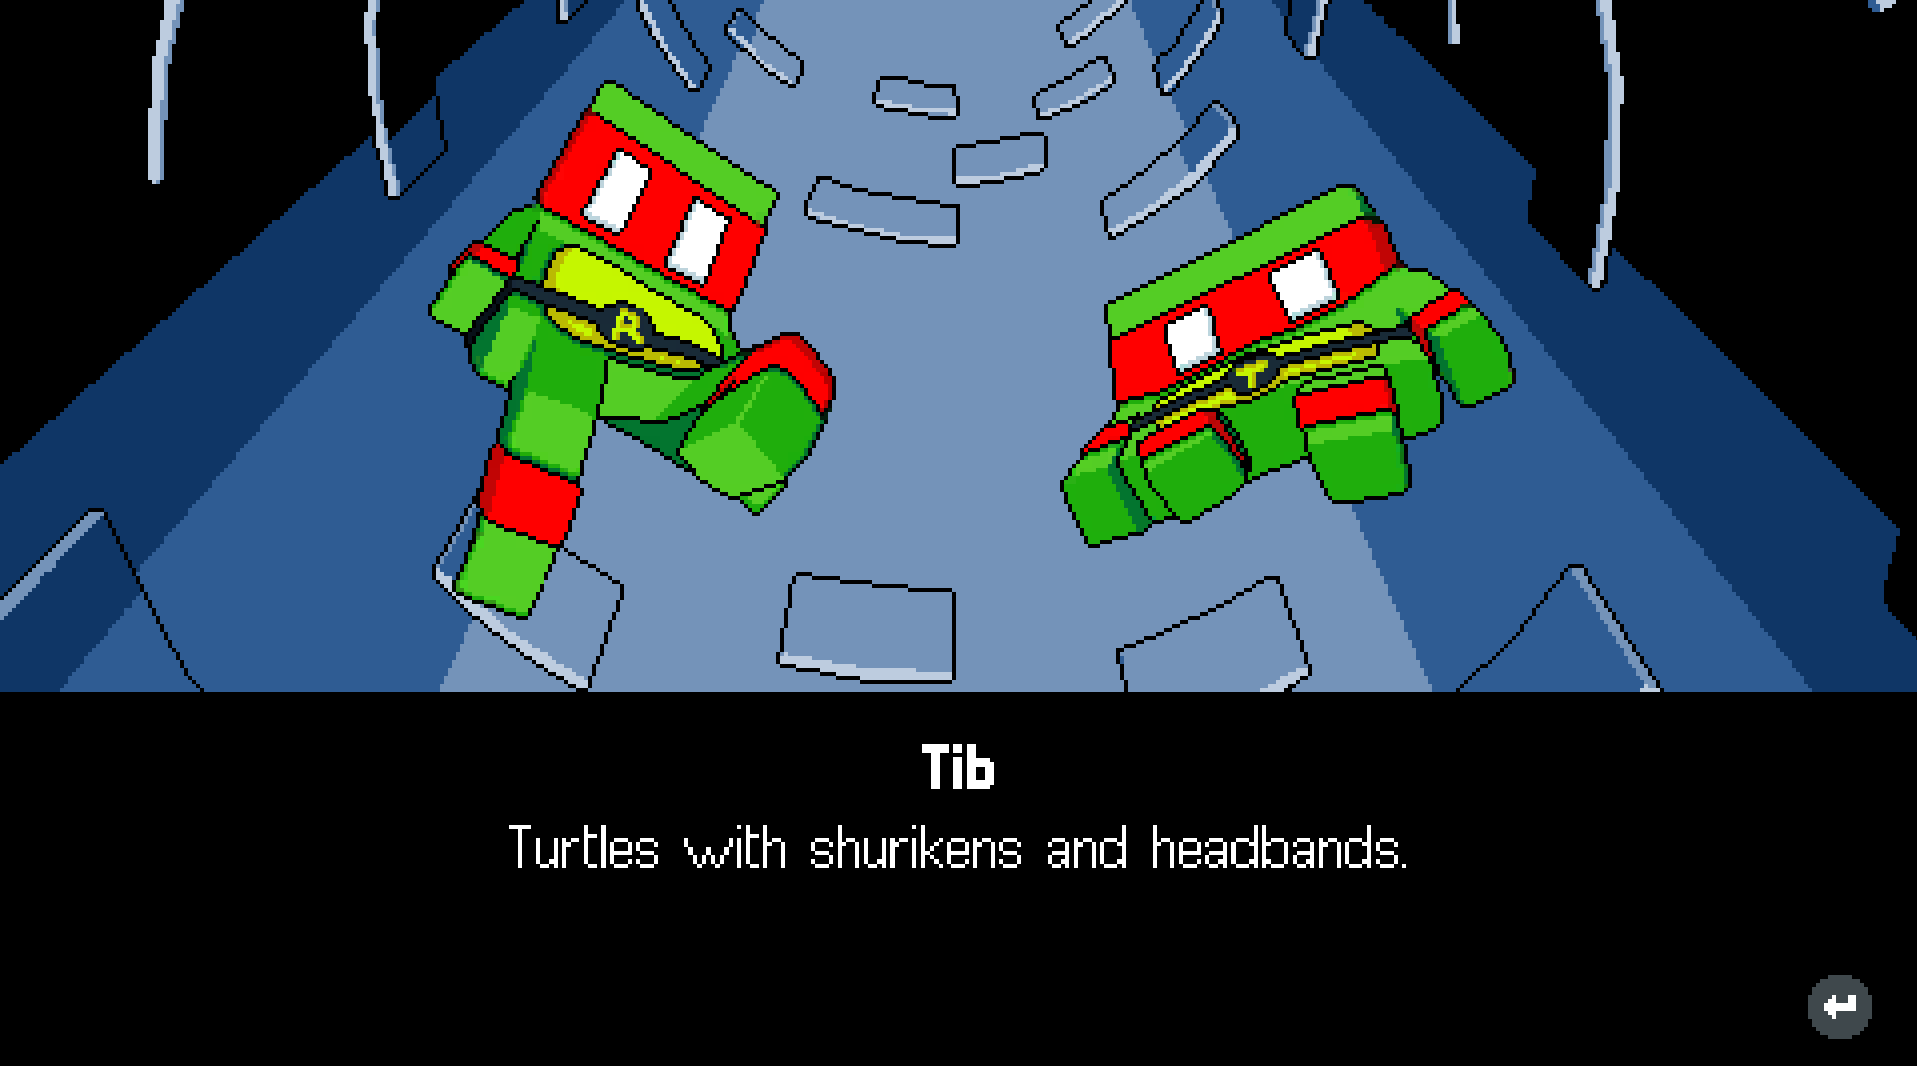 The game protagonists dressed as Ninja Turtles with red headbands, falling down a well. The text box says "Tib: Turtles with shurikens and headbands."